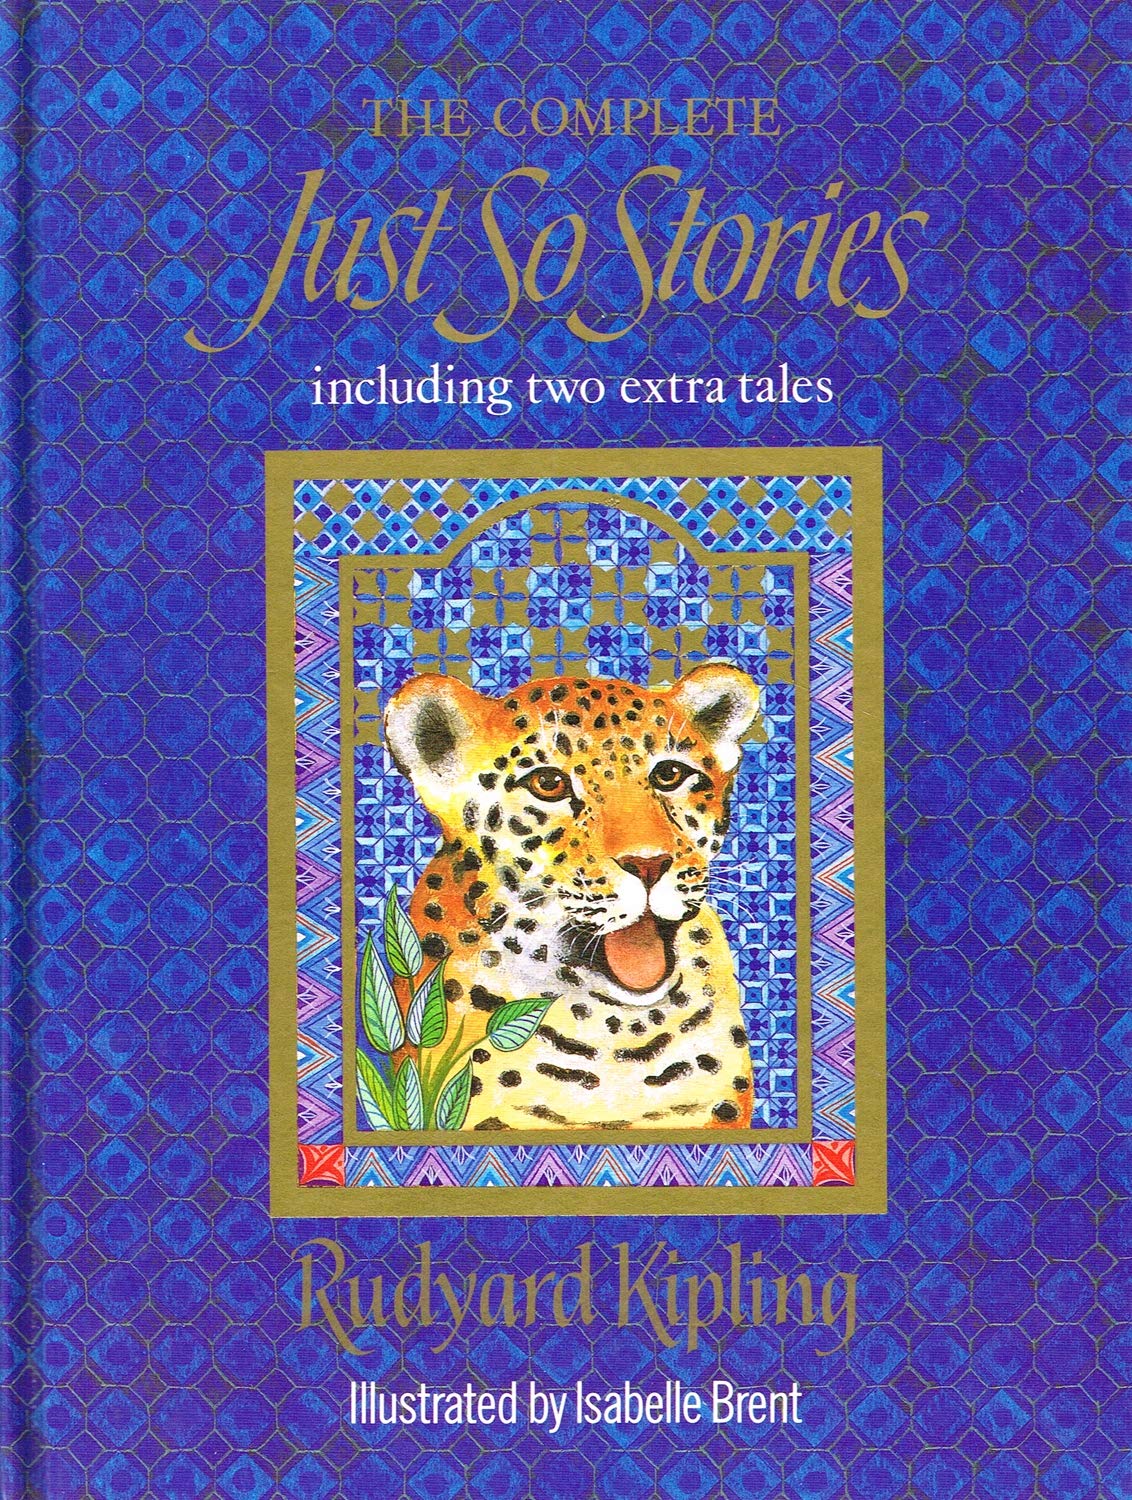 Rudyard Kipling: The Complete Just So Stories, illustrated by Isabelle Brent (Second Hand)